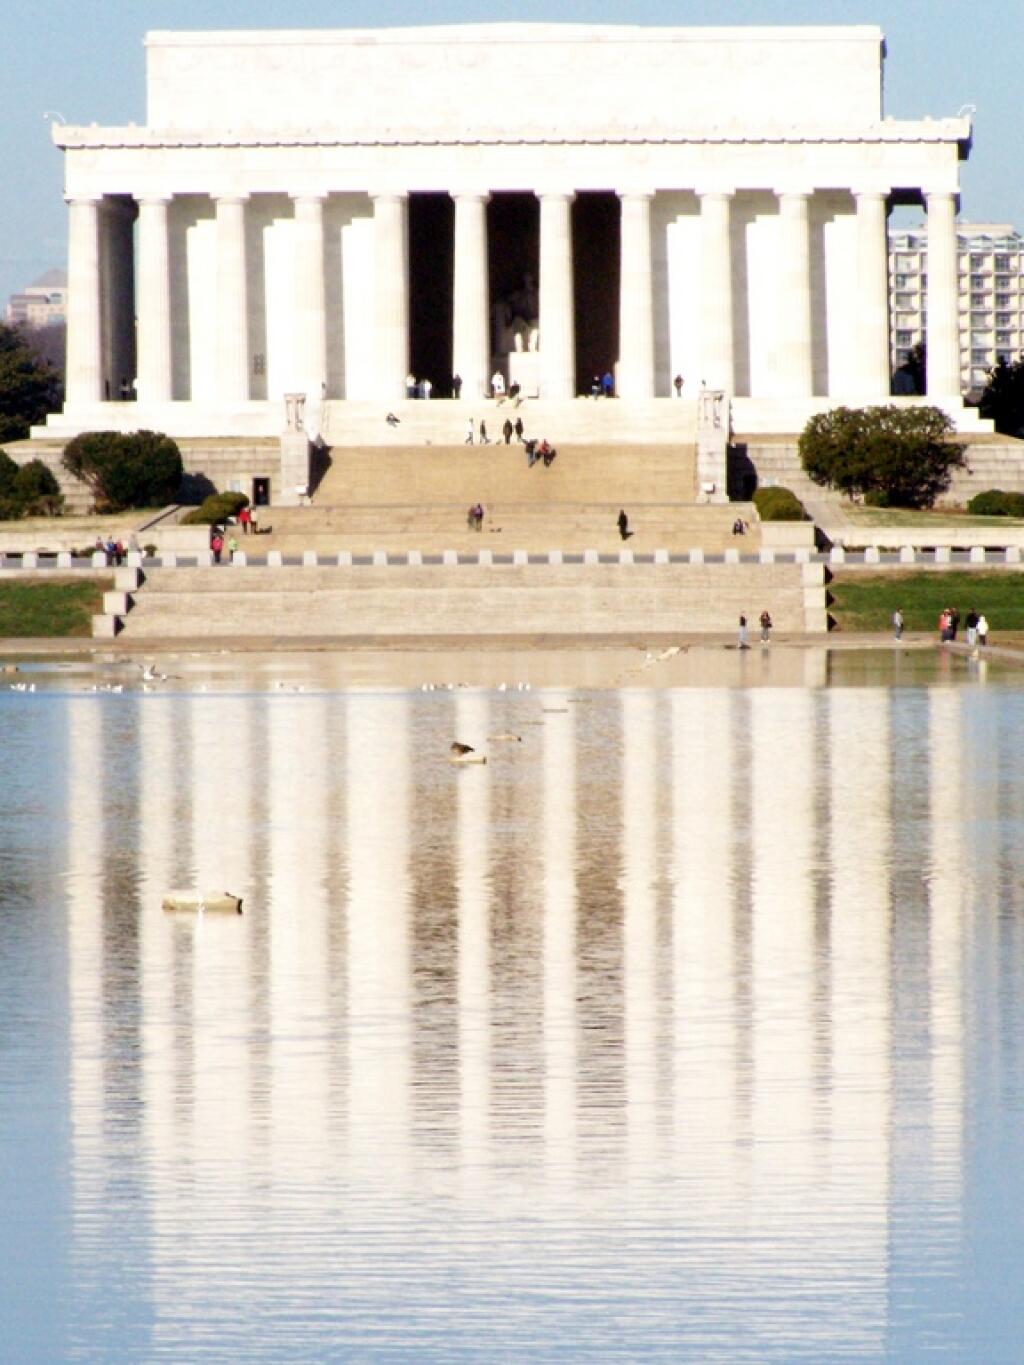 Reflection of Lincoln Memorial